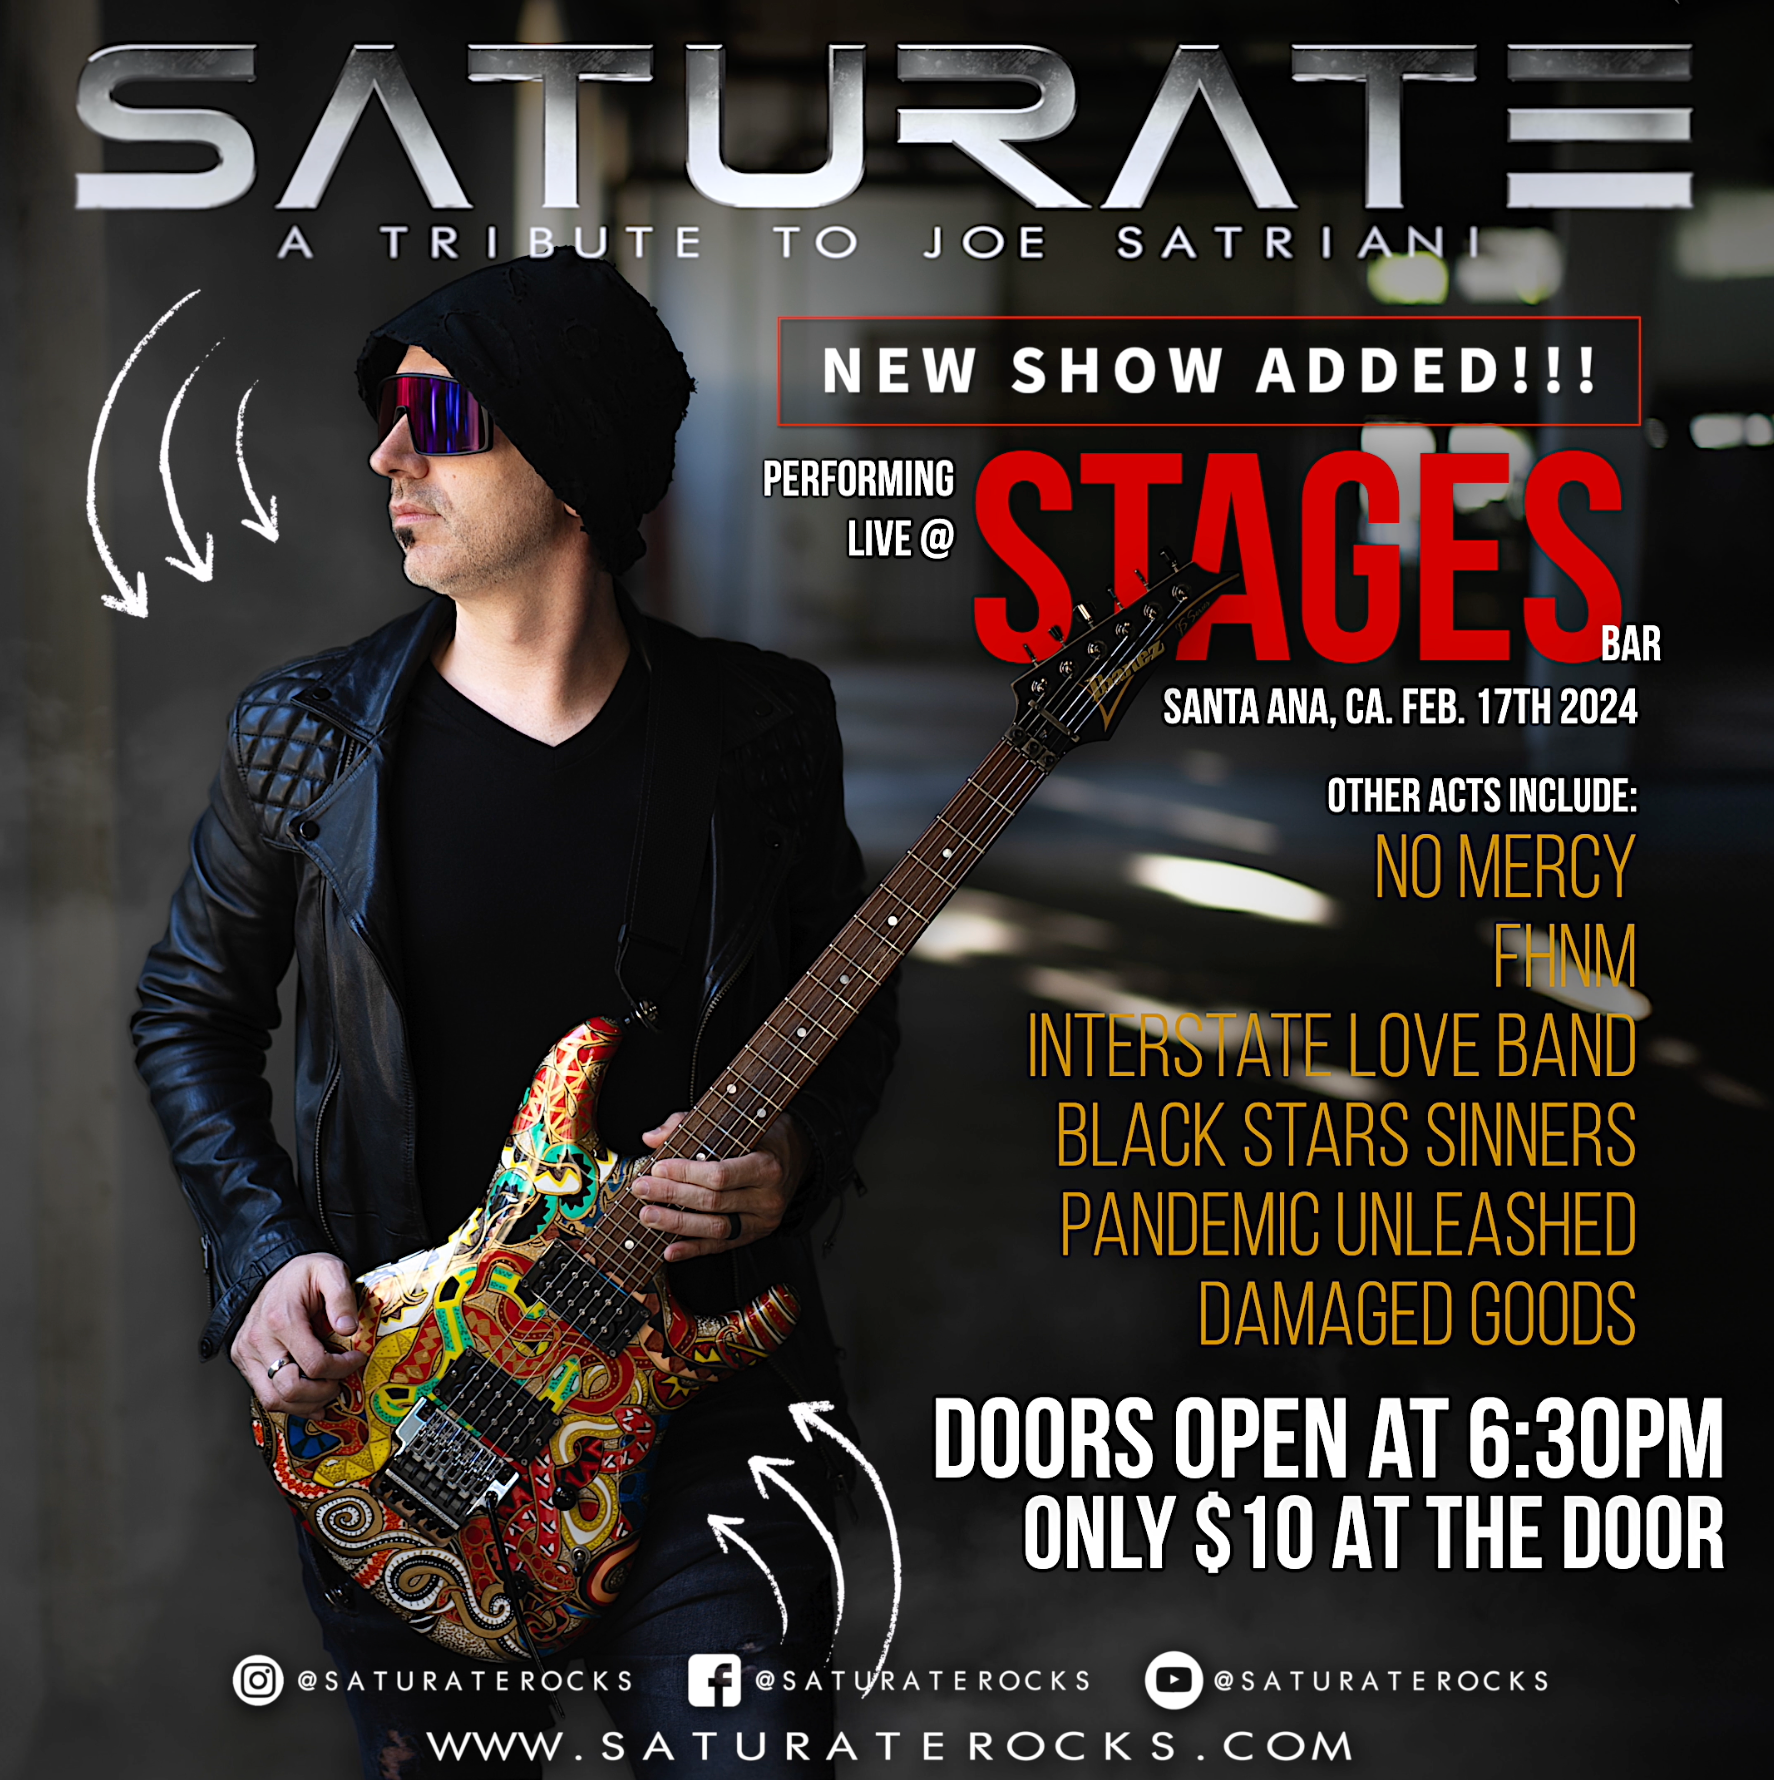 02.17.24 - SATURATE WILL BE PERFORMING LIVE @STAGES BAR & GRILL